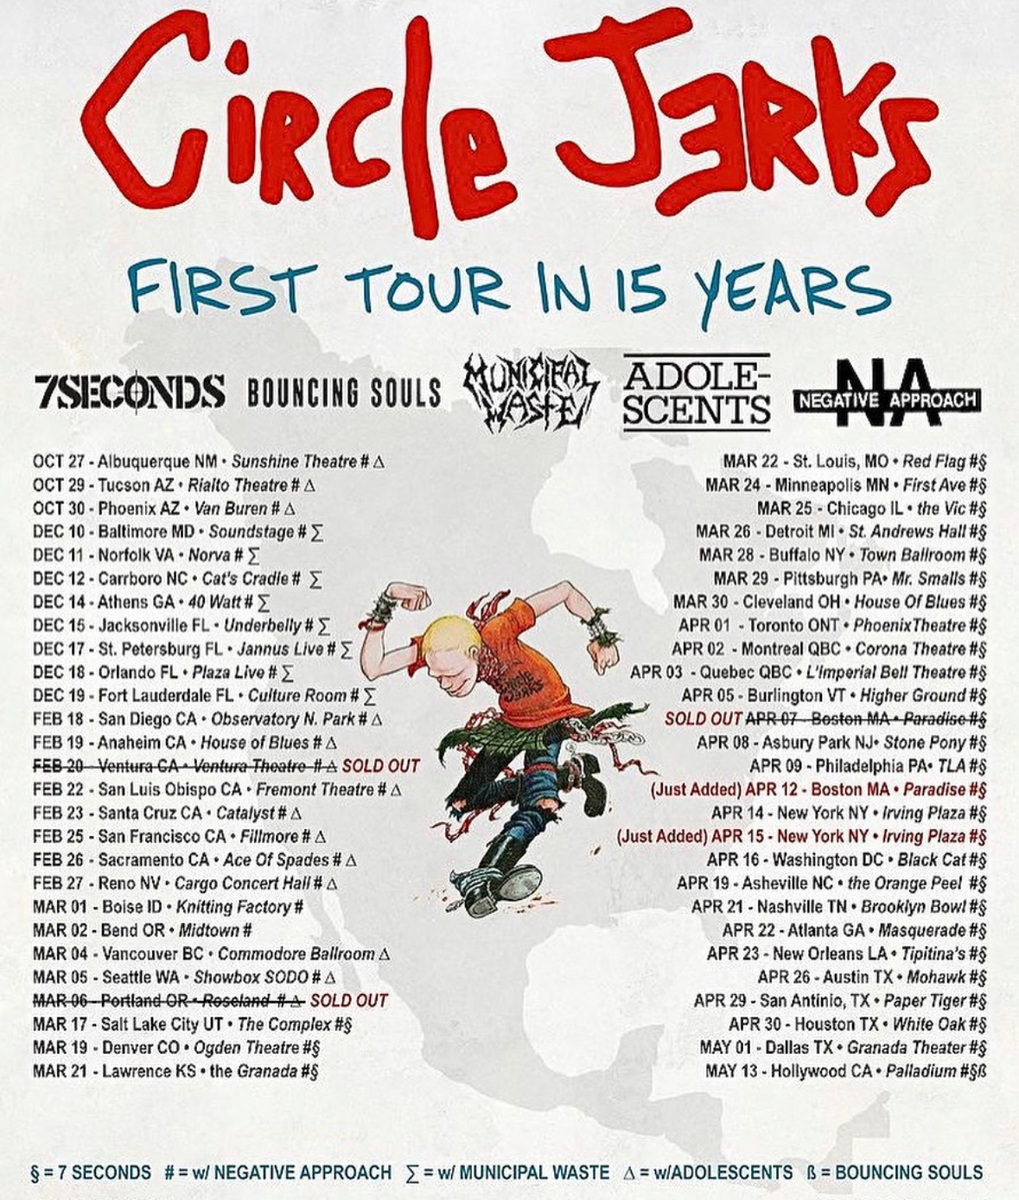 Circle Jerks Announce First North American Tour in 15 Years